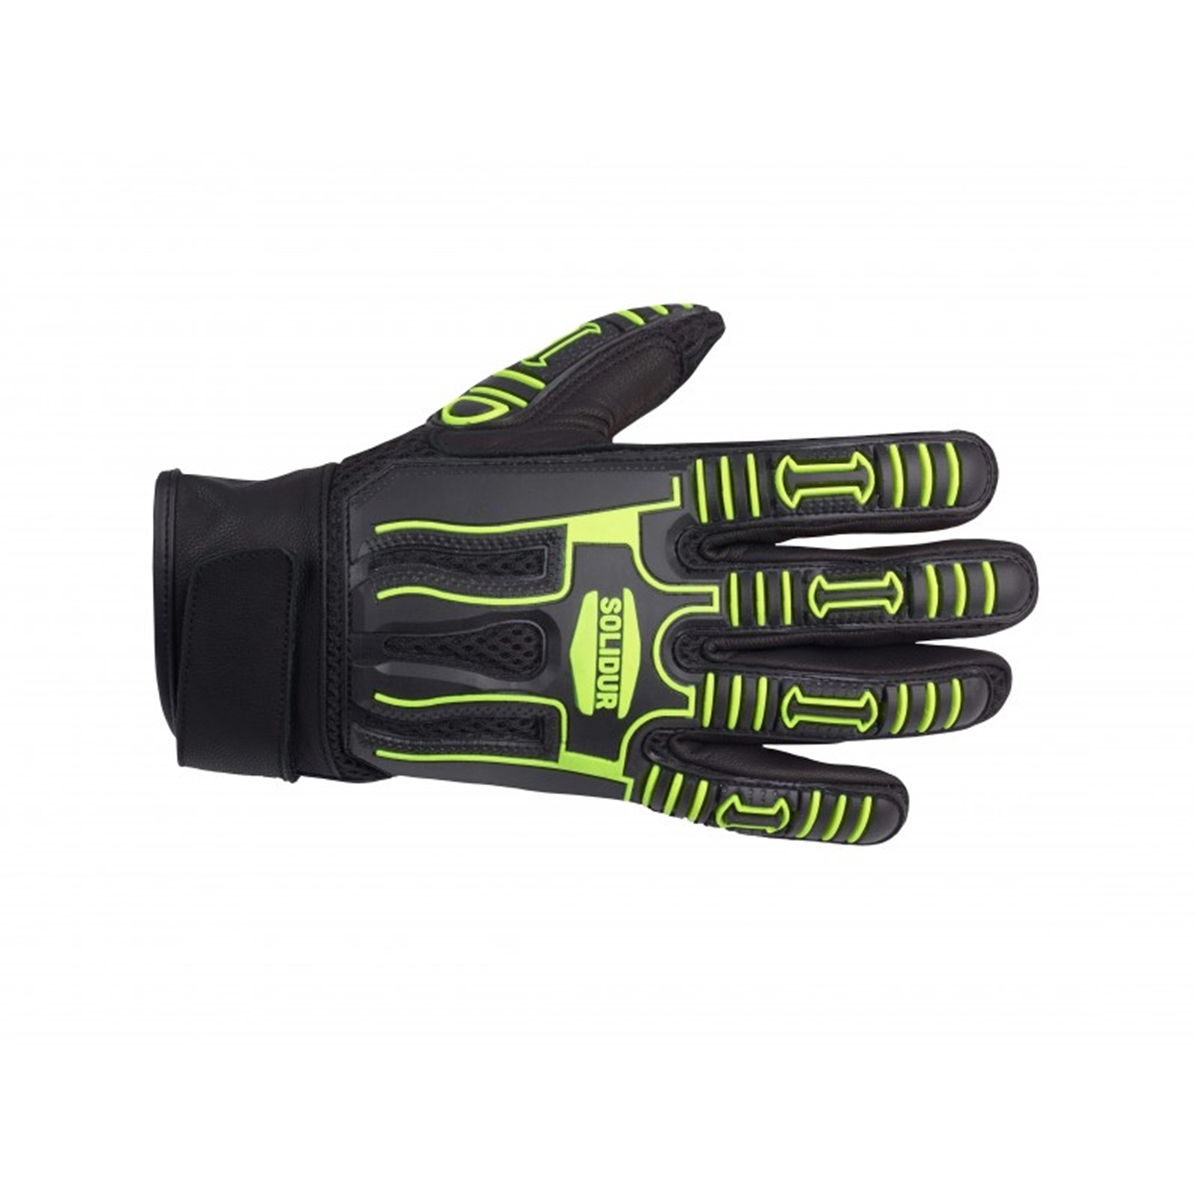 Gants motoculture double protection froid HanderGreen® taille 10